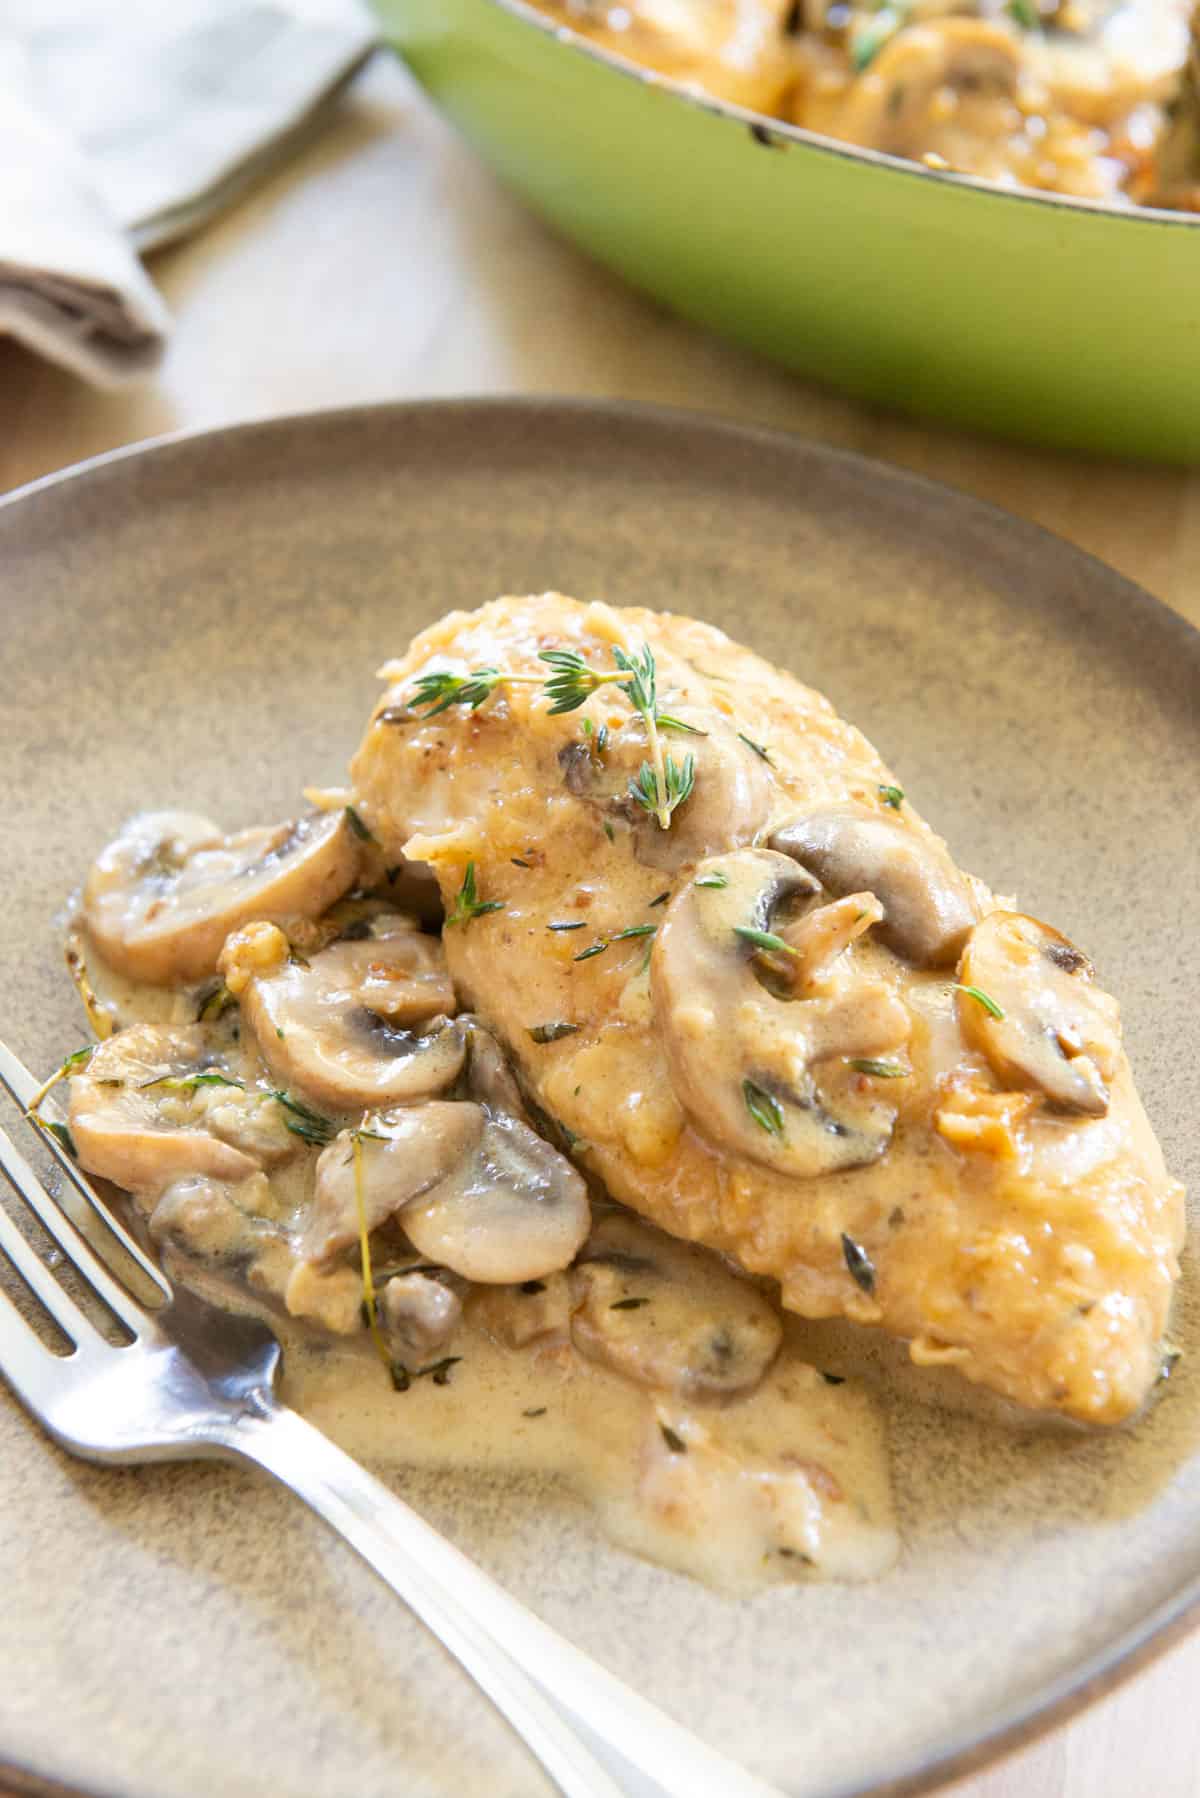 A Chicken Marsala Breast On Plate with Sauce and Mushrooms